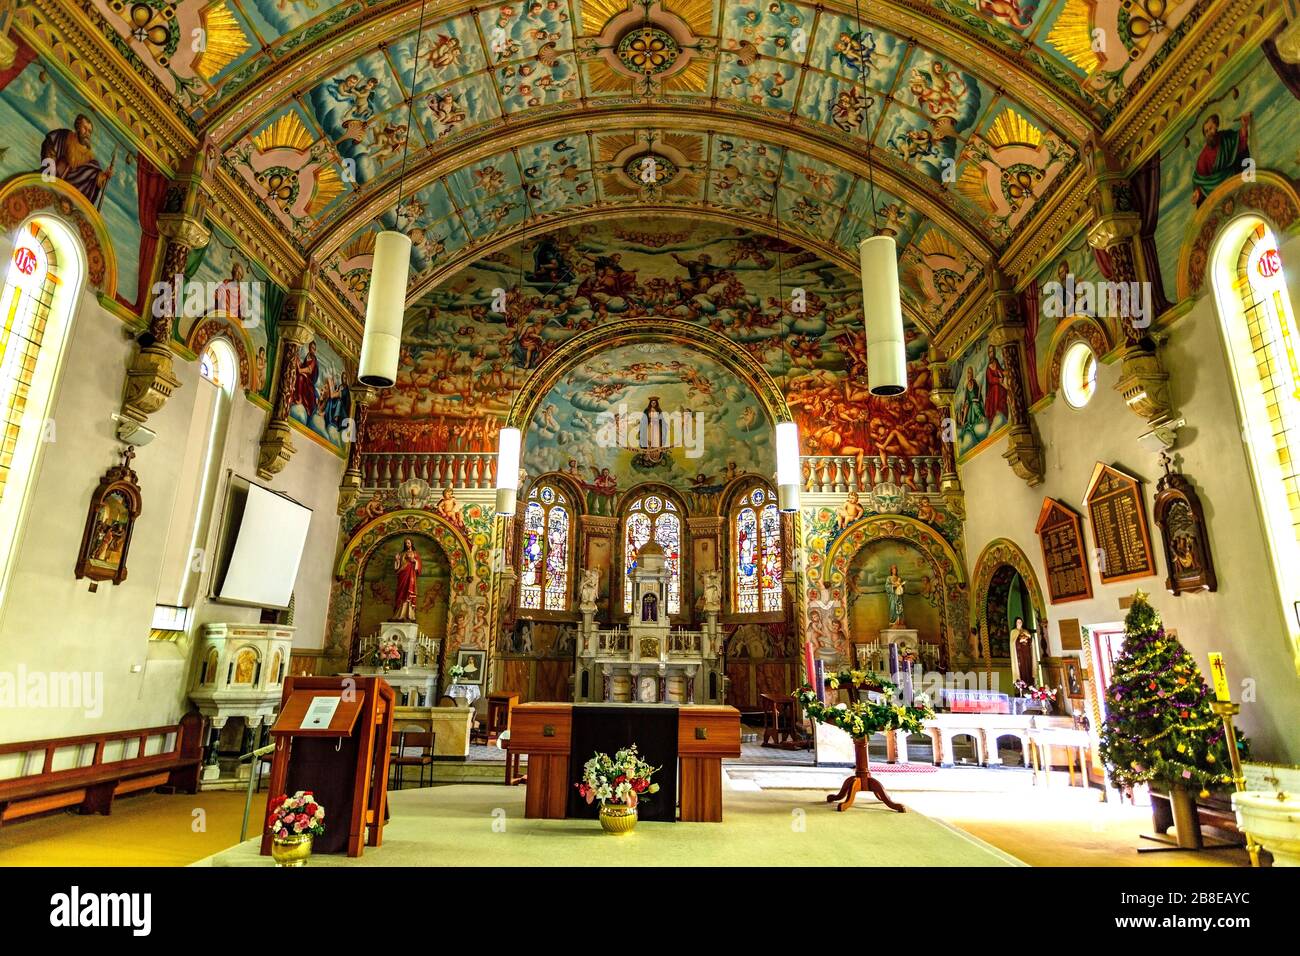 View of the interior of the Church of St Mary and its murals covering walls and ceiling depicting saints, the trinity, hell, purgatory, heaven and cru Stock Photo